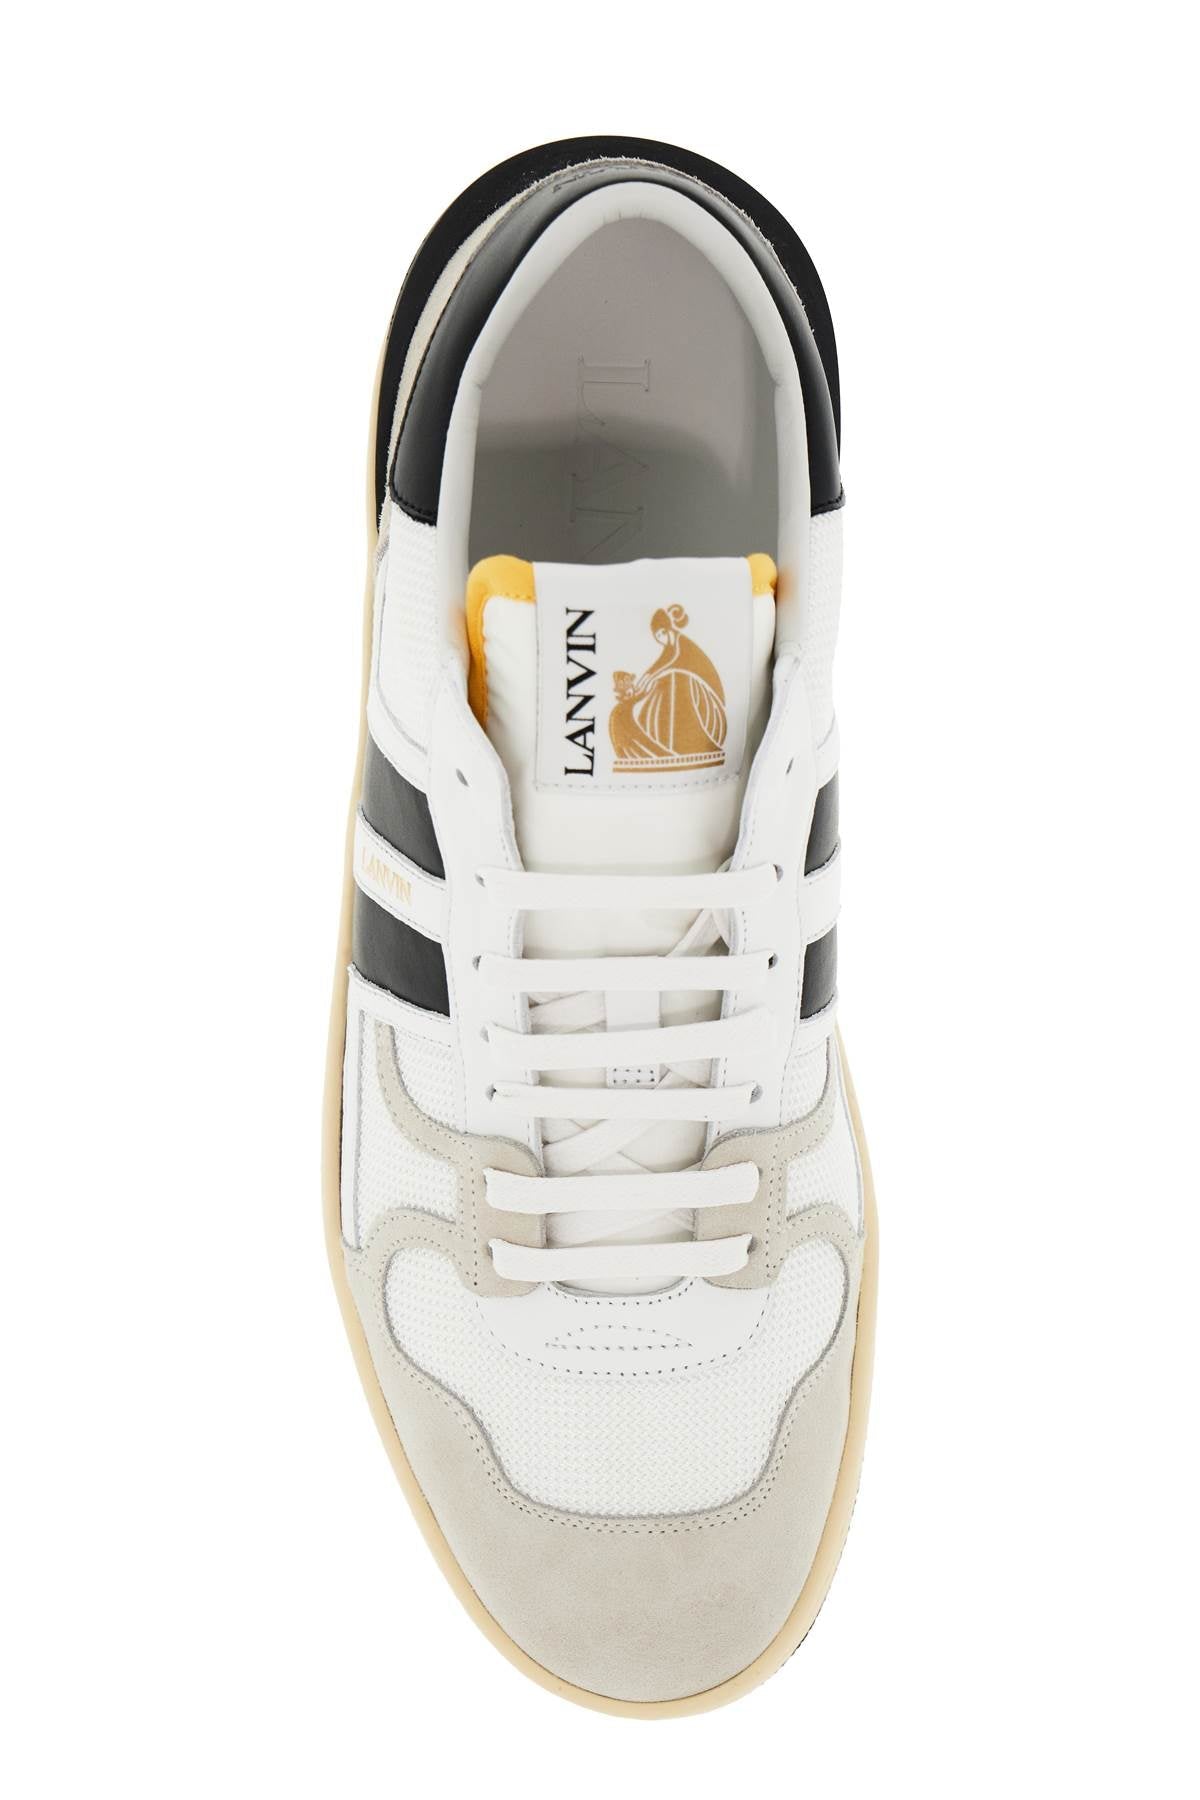 Lanvin "mesh and leather clay sneakers with